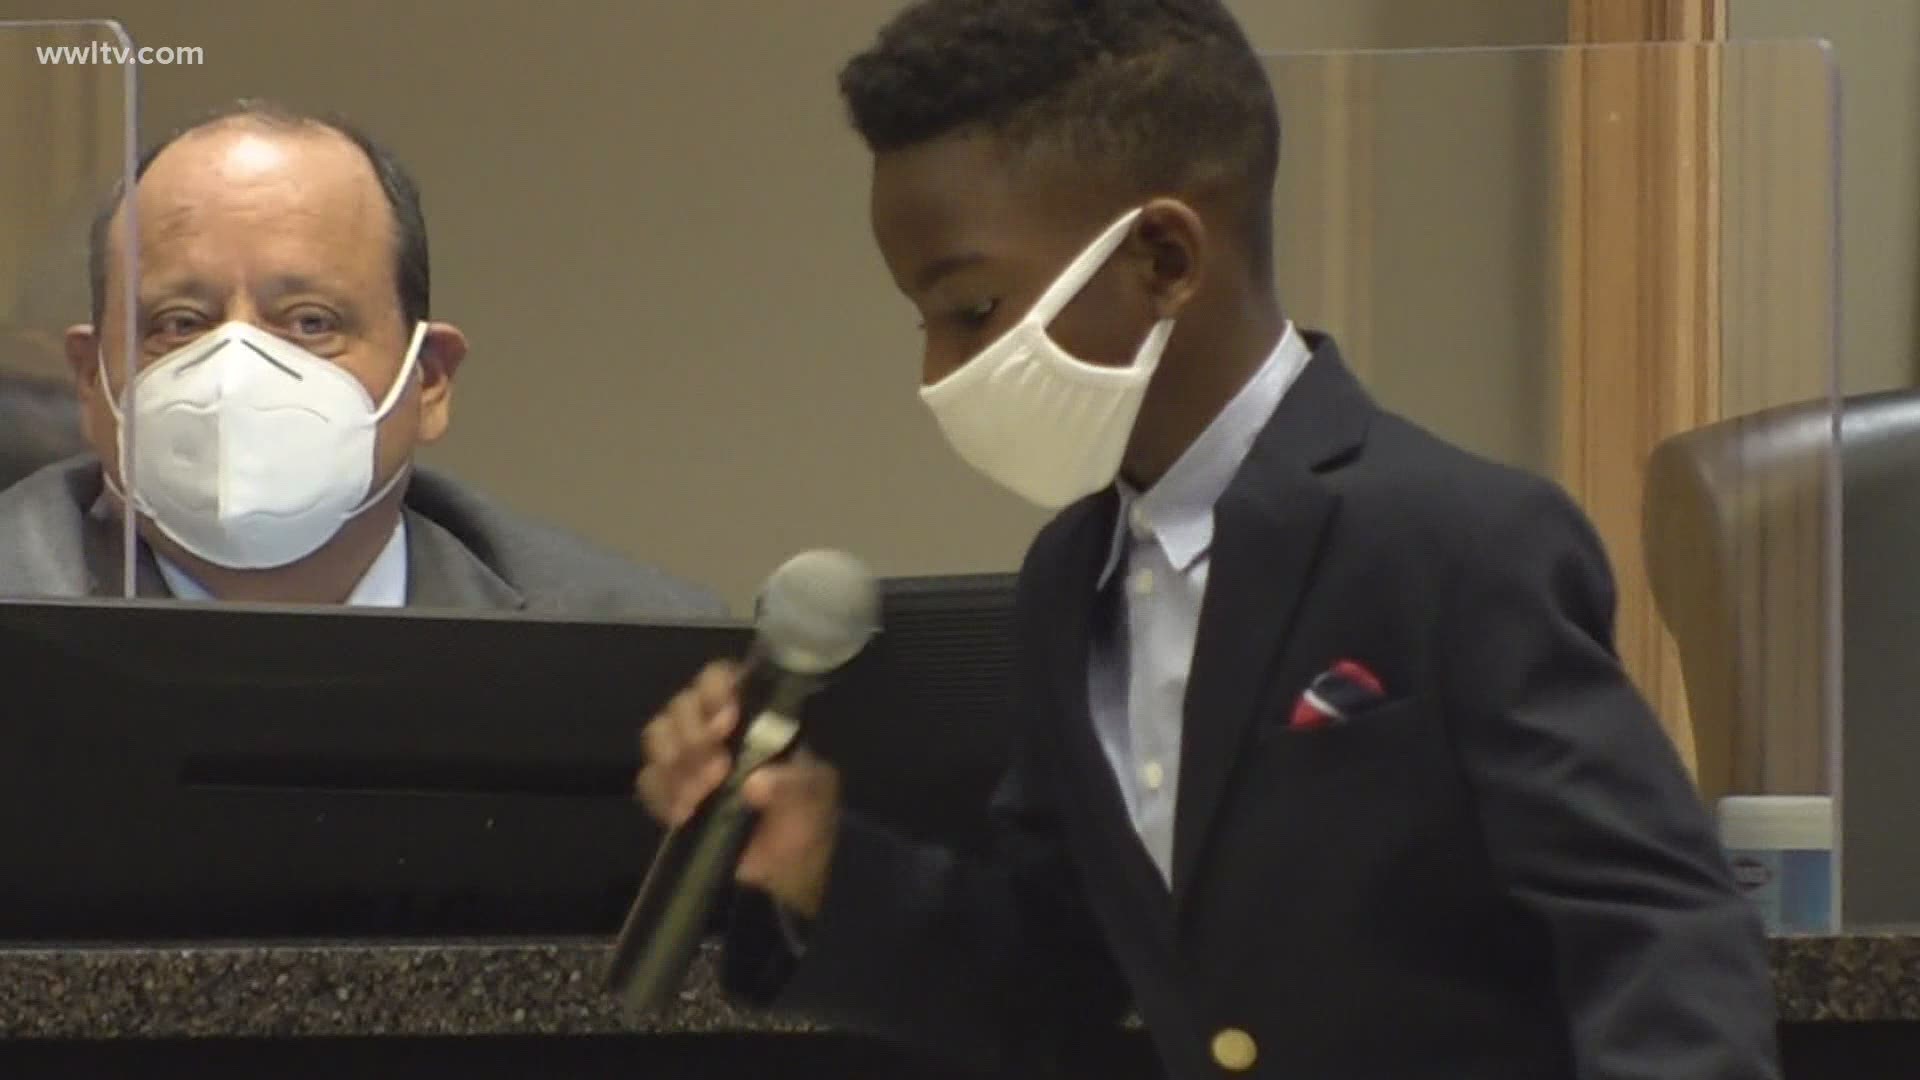 A young Jefferson Parish student will have his suspension remaining on his record after a heated hearing. The suspension was reduced however.